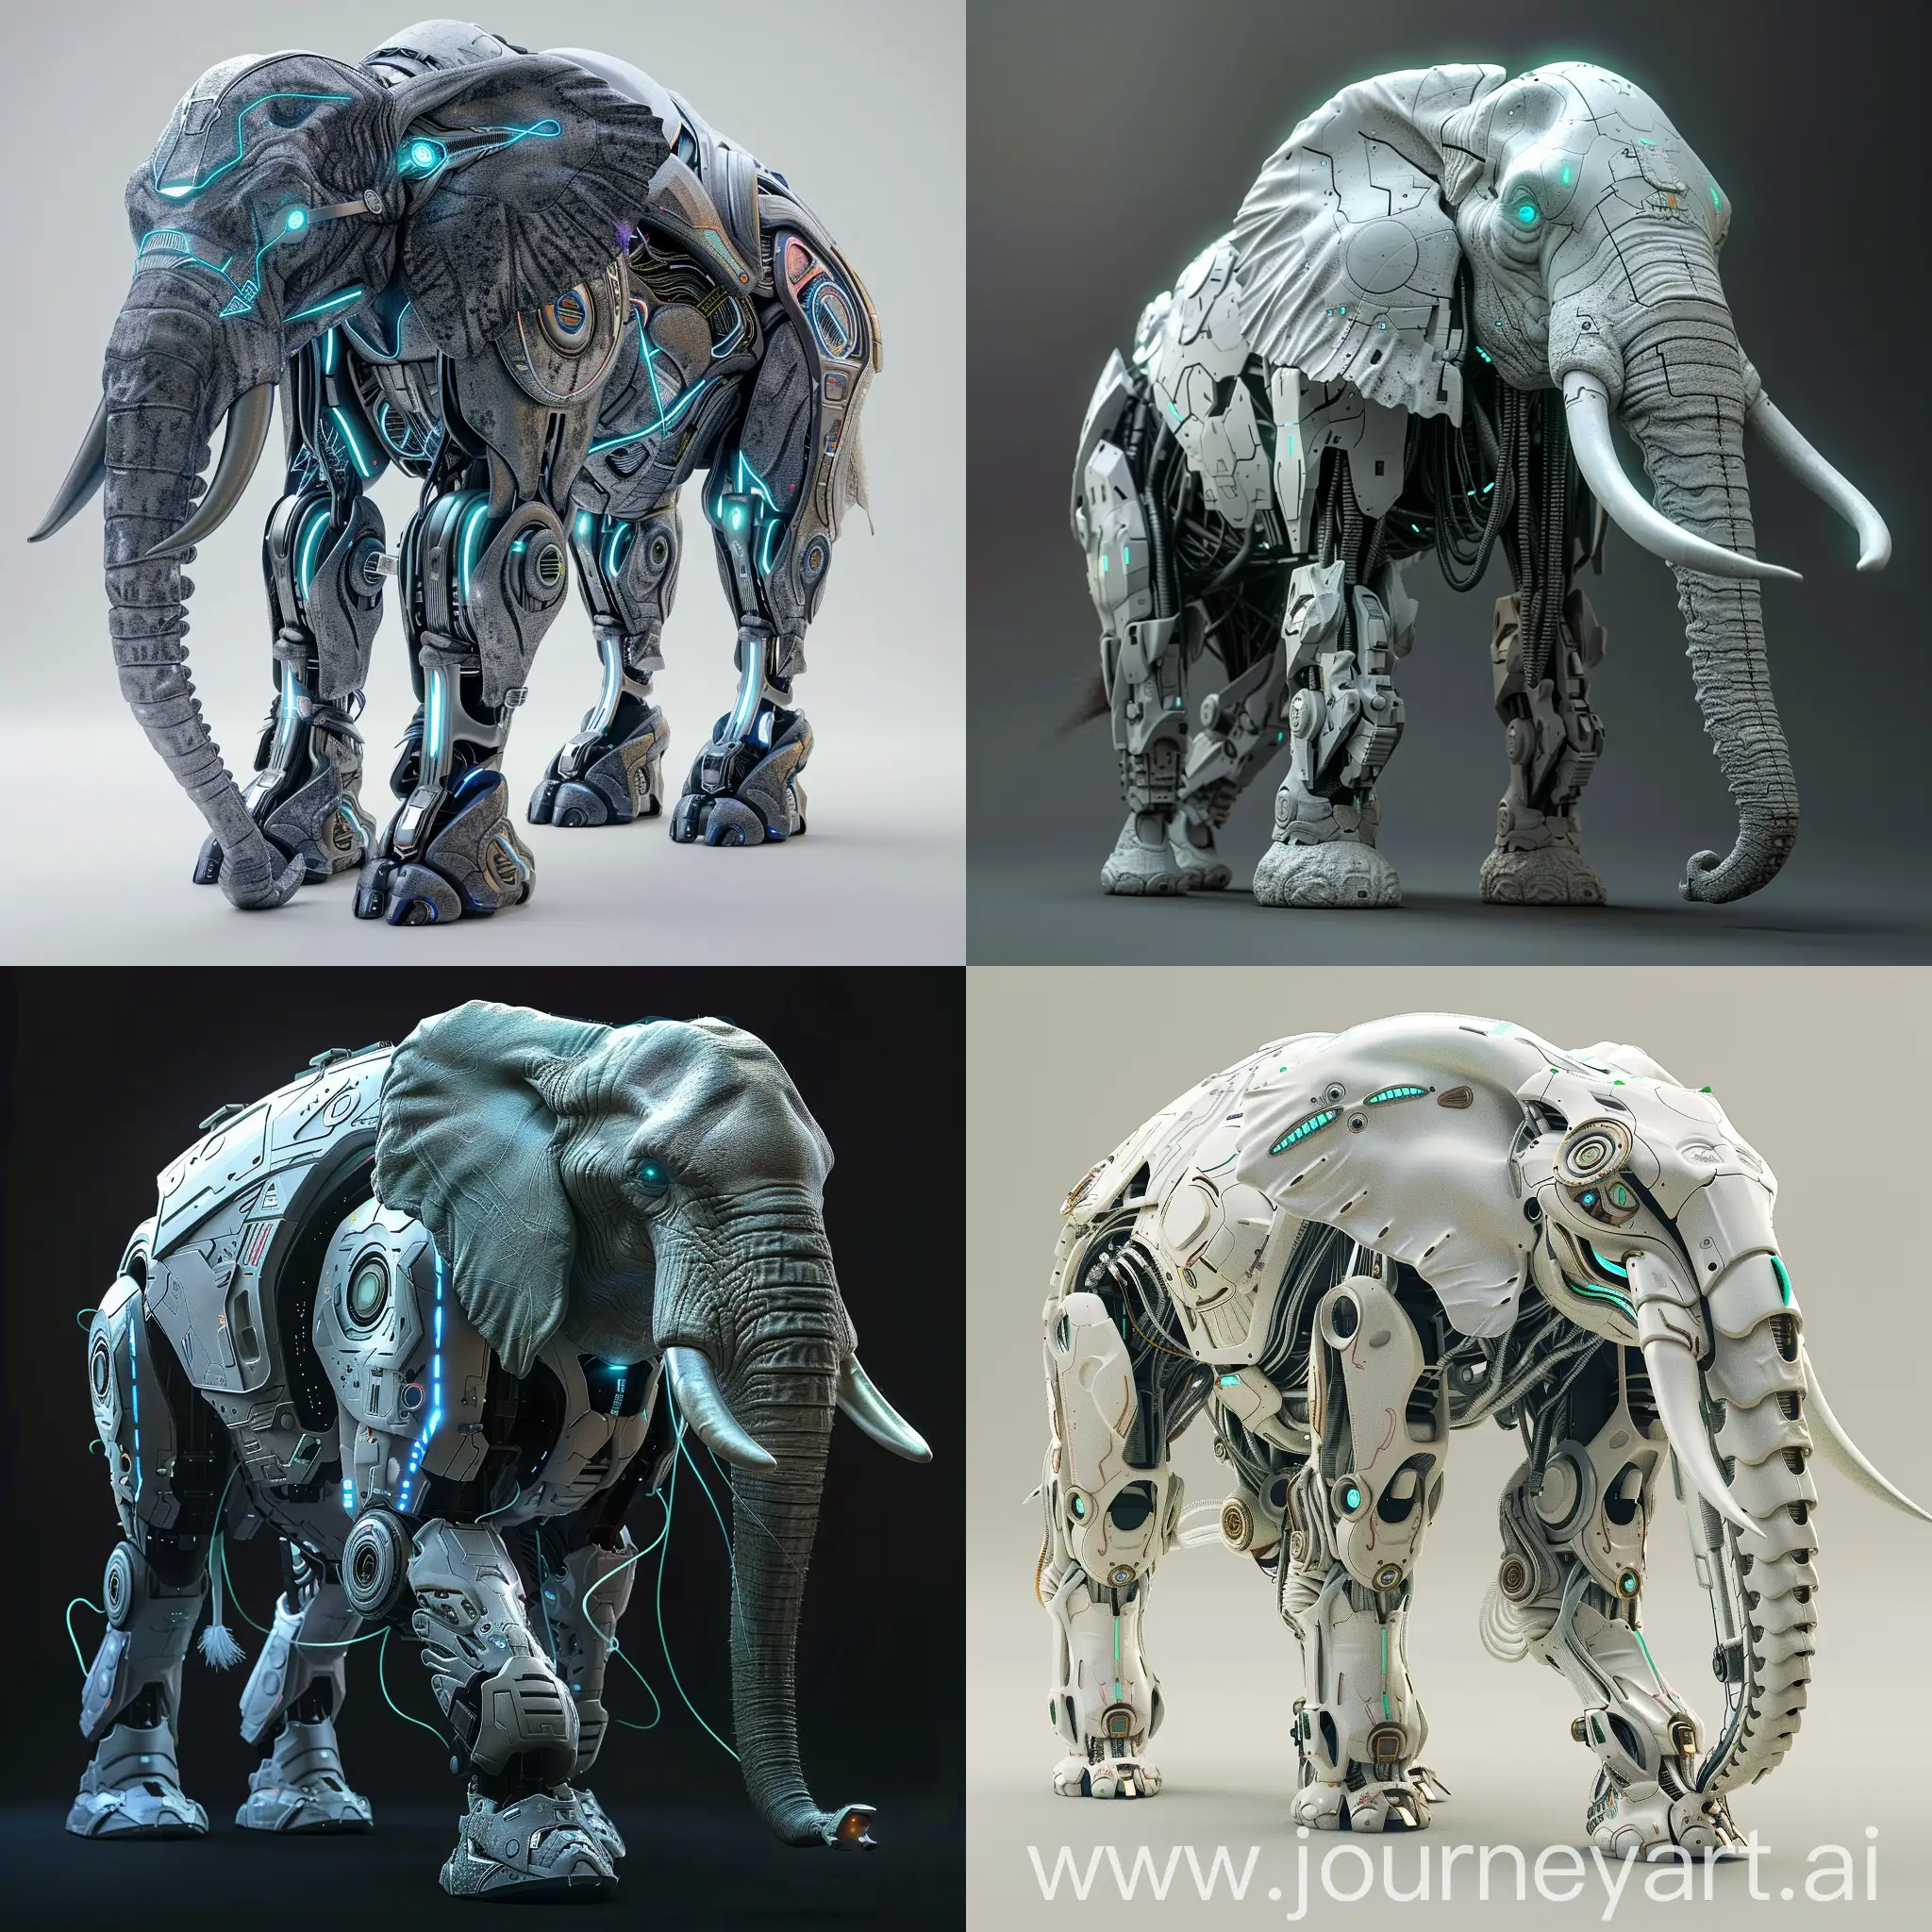 Futuristic-Elephant-with-Bionic-Skin-and-Holographic-Display